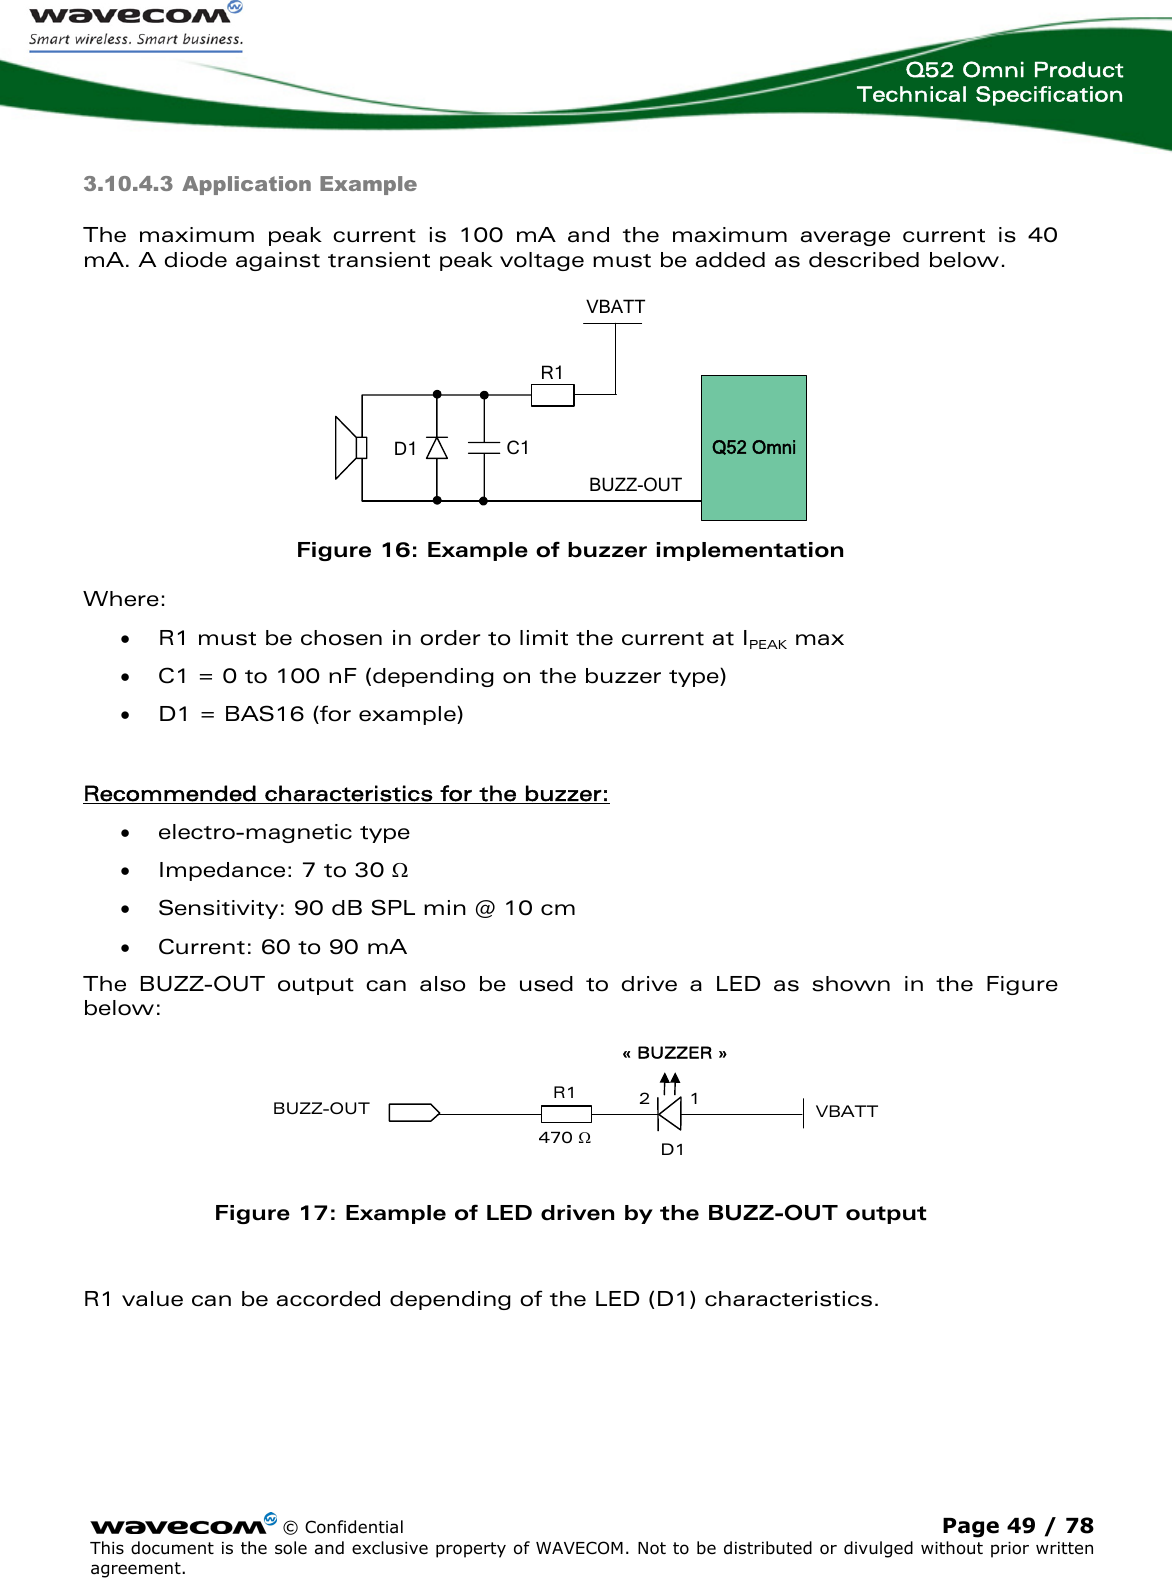  Q52 Omni Product Technical Specification   3.10.4.3 Application Example The maximum peak current is 100 mA and the maximum average current is 40 mA. A diode against transient peak voltage must be added as described below.   © Confidential Page 49 / 78 This document is the sole and exclusive property of WAVECOM. Not to be distributed or divulged without prior written agreement.   BUZZ-OUT C1  D1 VBATTR1Q52 Omni Figure 16: Example of buzzer implementation Where: • R1 must be chosen in order to limit the current at IPEAK max • C1 = 0 to 100 nF (depending on the buzzer type) • D1 = BAS16 (for example)  Recommended characteristics for the buzzer: • electro-magnetic type • Impedance: 7 to 30 Ω • Sensitivity: 90 dB SPL min @ 10 cm • Current: 60 to 90 mA The BUZZ-OUT output can also be used to drive a LED as shown in the Figure below: BUZZ-OUT« BUZZER »D112R1470 ΩVBATT Figure 17: Example of LED driven by the BUZZ-OUT output  R1 value can be accorded depending of the LED (D1) characteristics. 